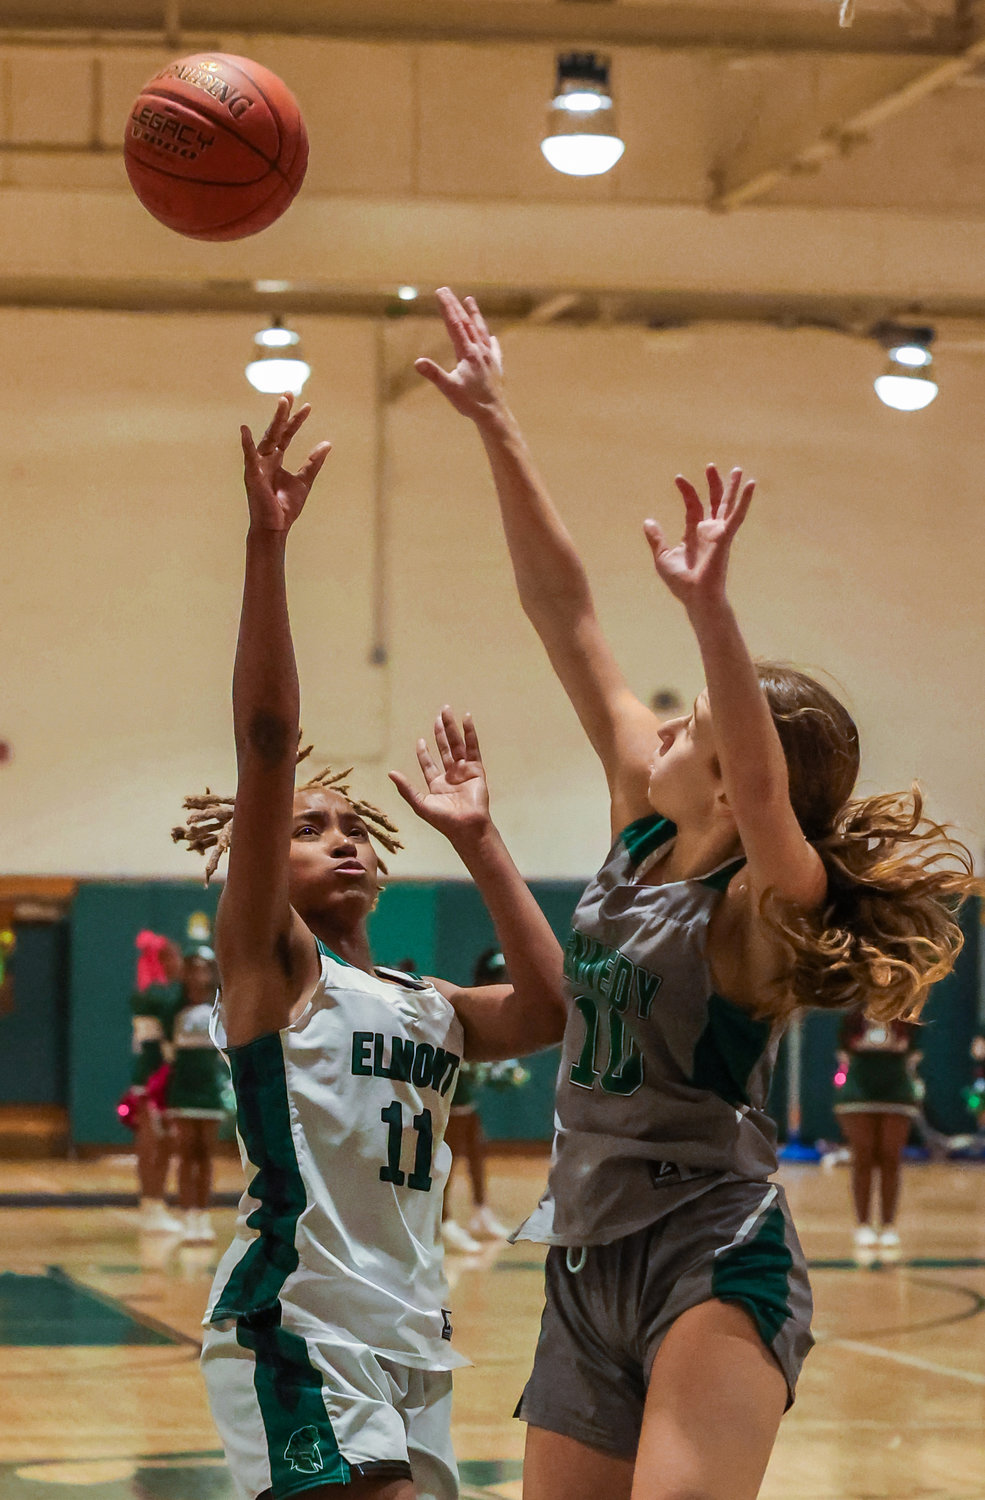 Taylah Farquharson, left, netted a game-high 14 points in Elmont's 42-32 win over Kennedy.